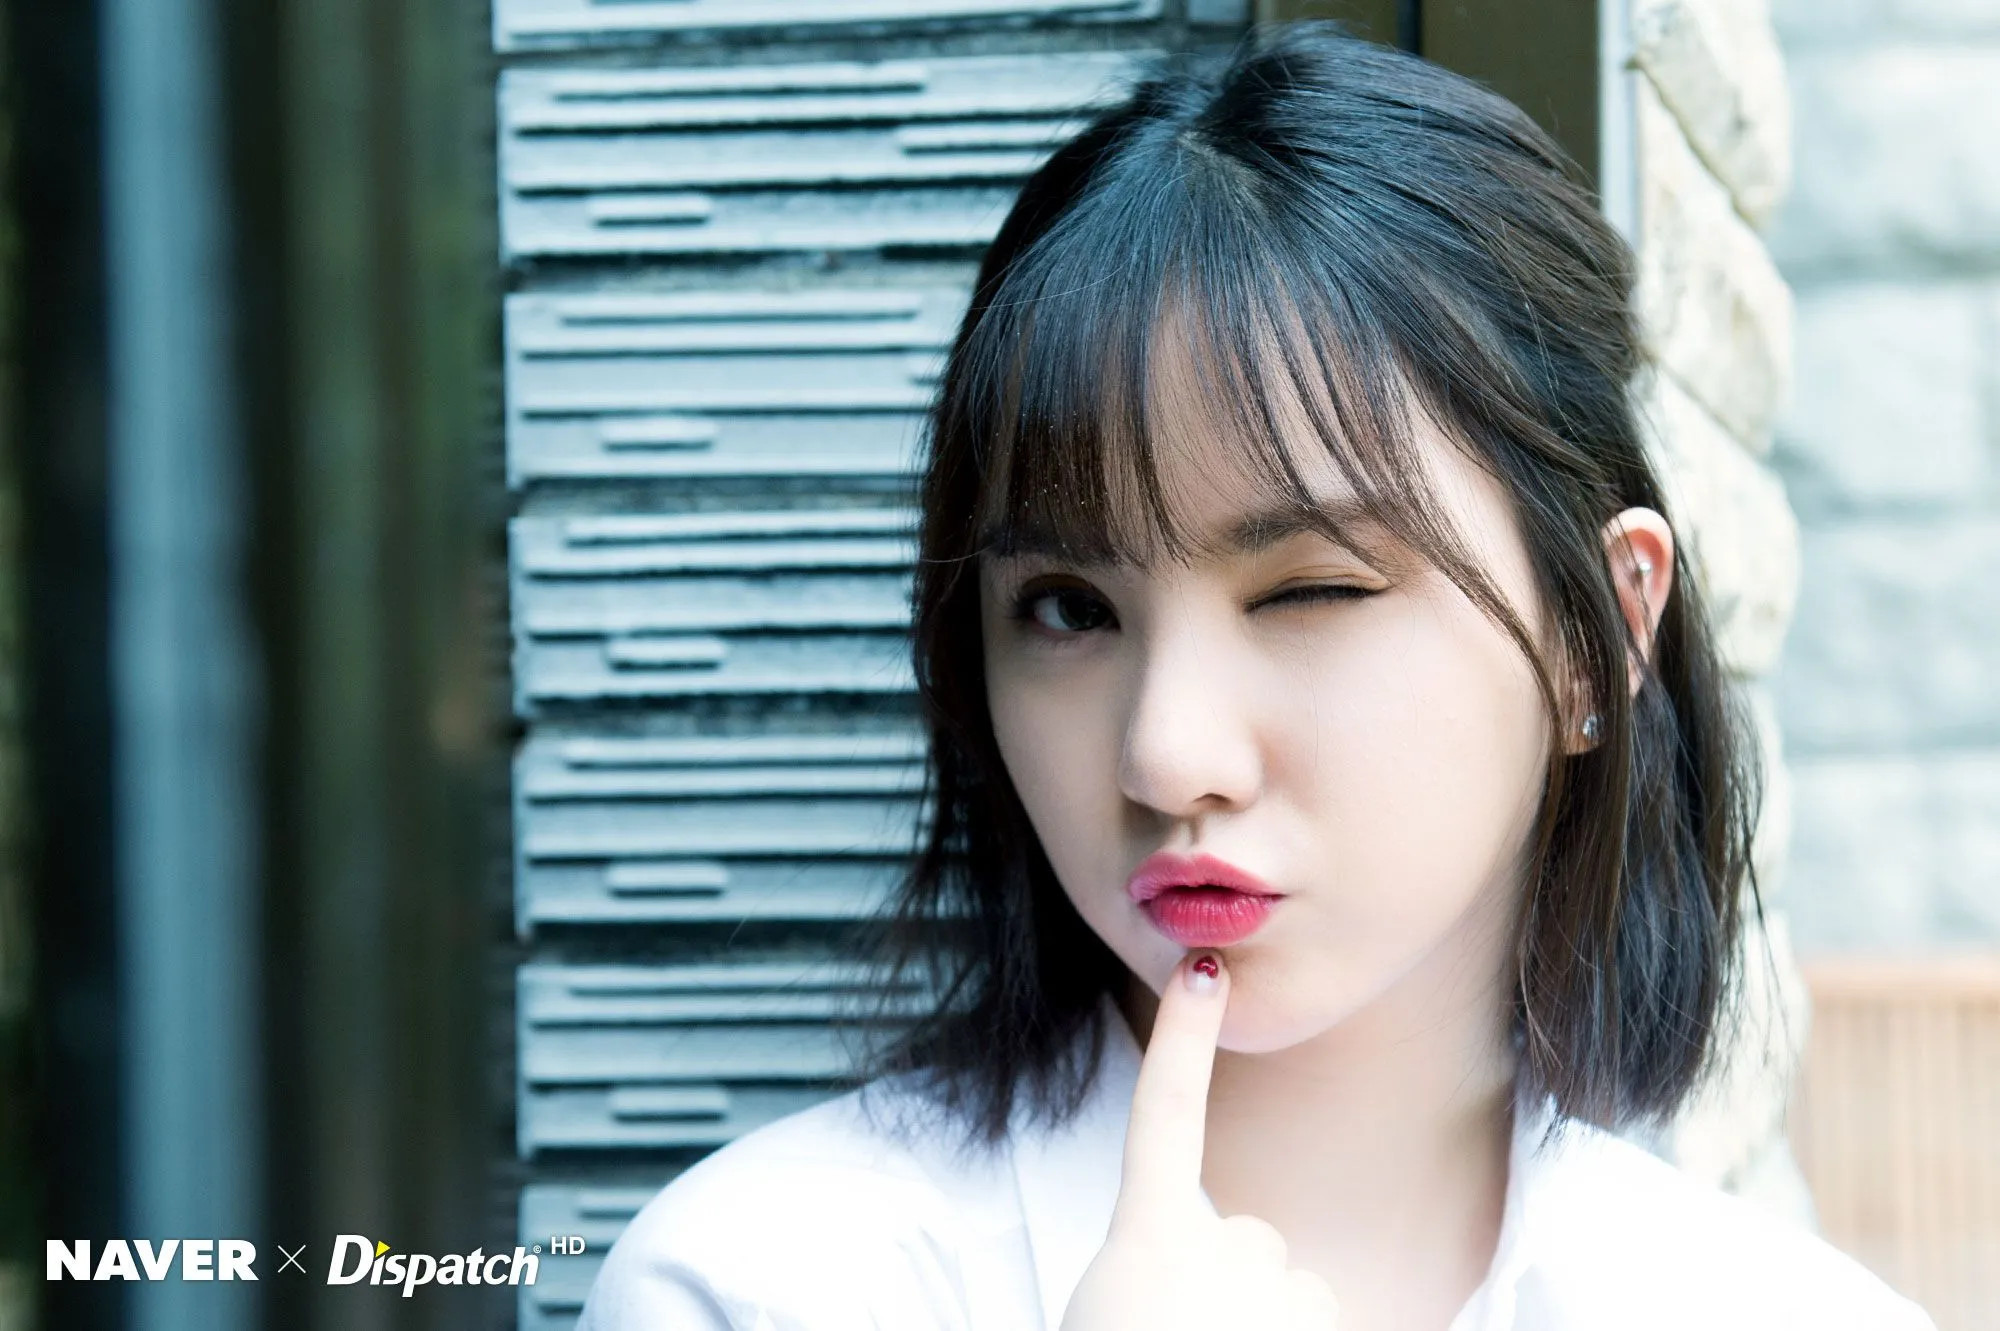 GFRIEND Eunha 'Parallel' Jacket photoshoot by Naver x Dispatch | kpopping